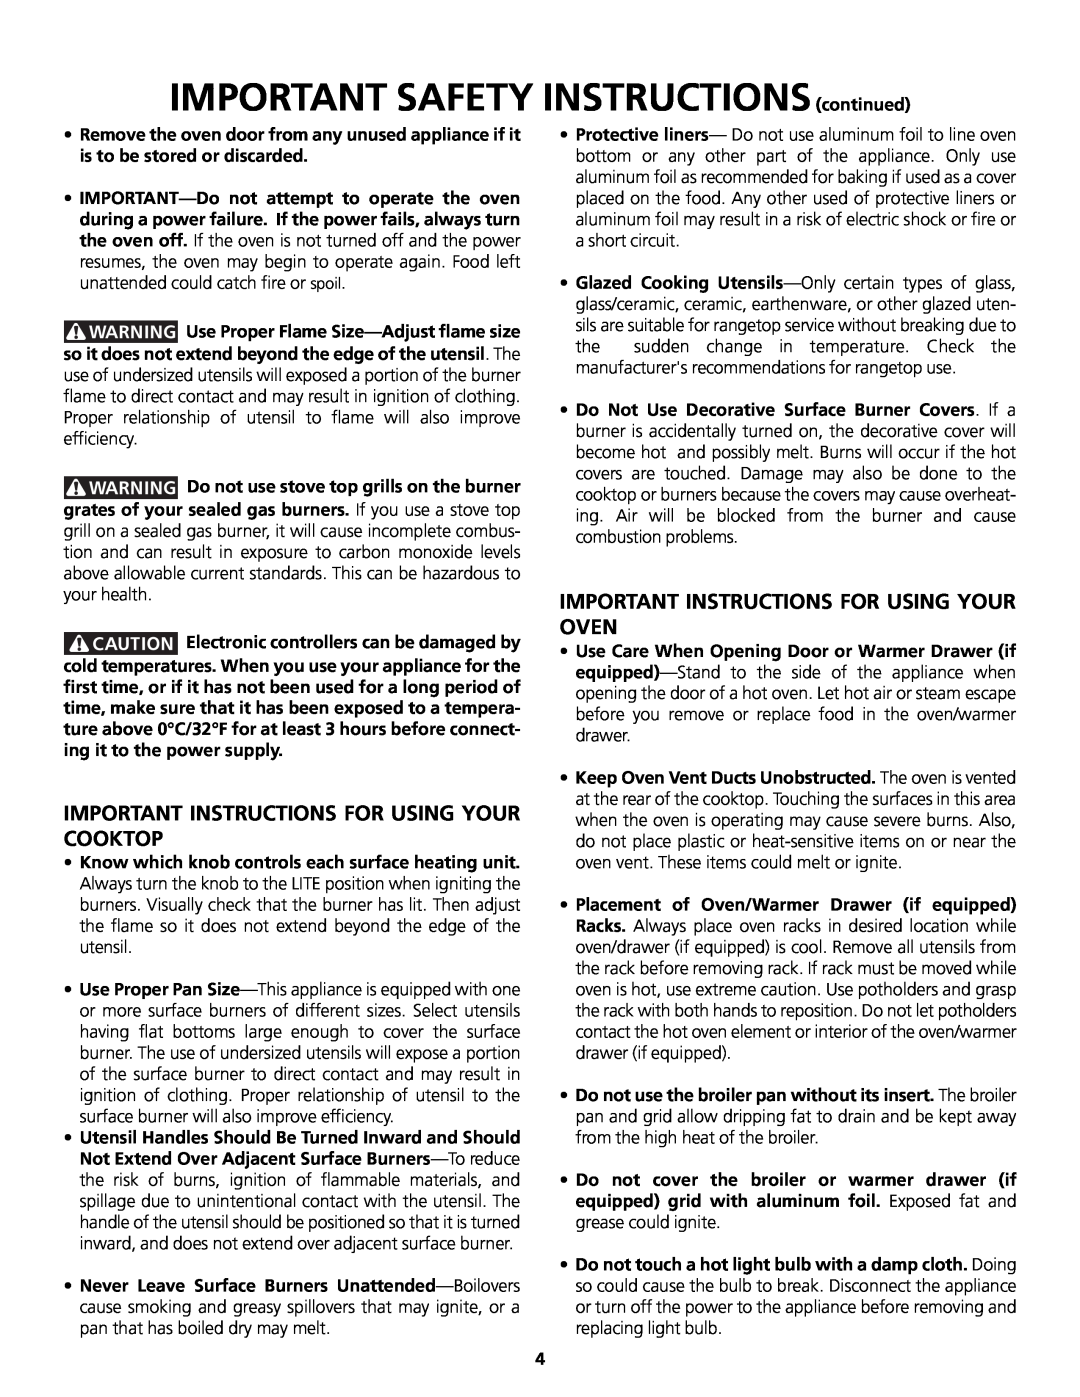 Frigidaire 318200858 IMPORTANT SAFETY INSTRUCTIONS continued, Important Instructions For Using Your Cooktop 